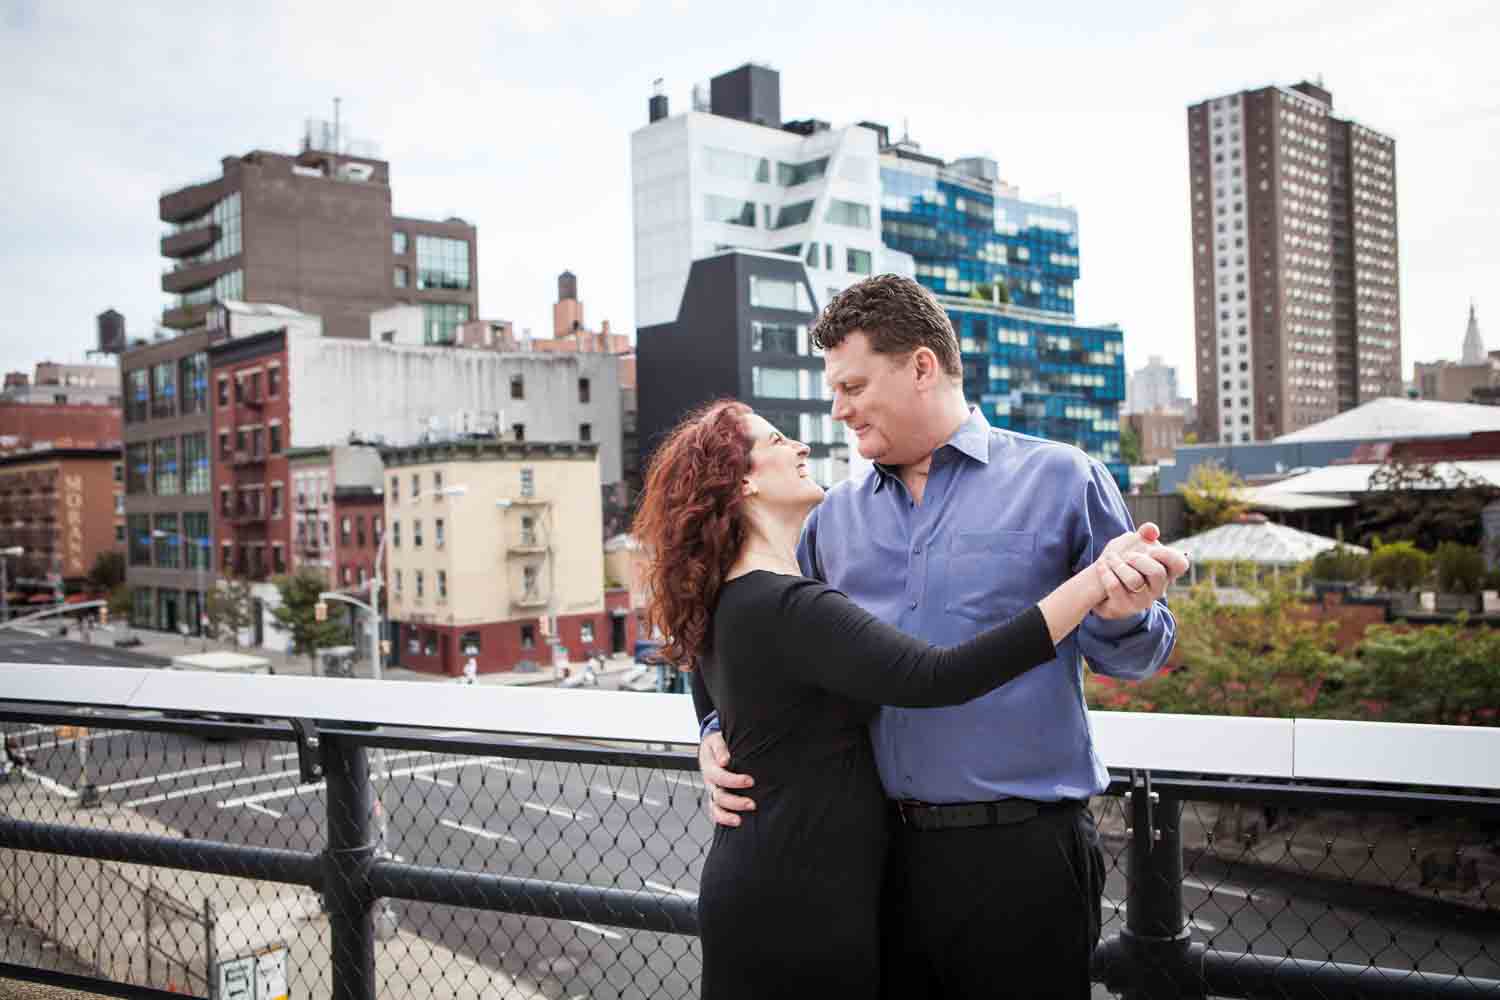 Couple dancing together on the High Line observation deck with NYC street in background